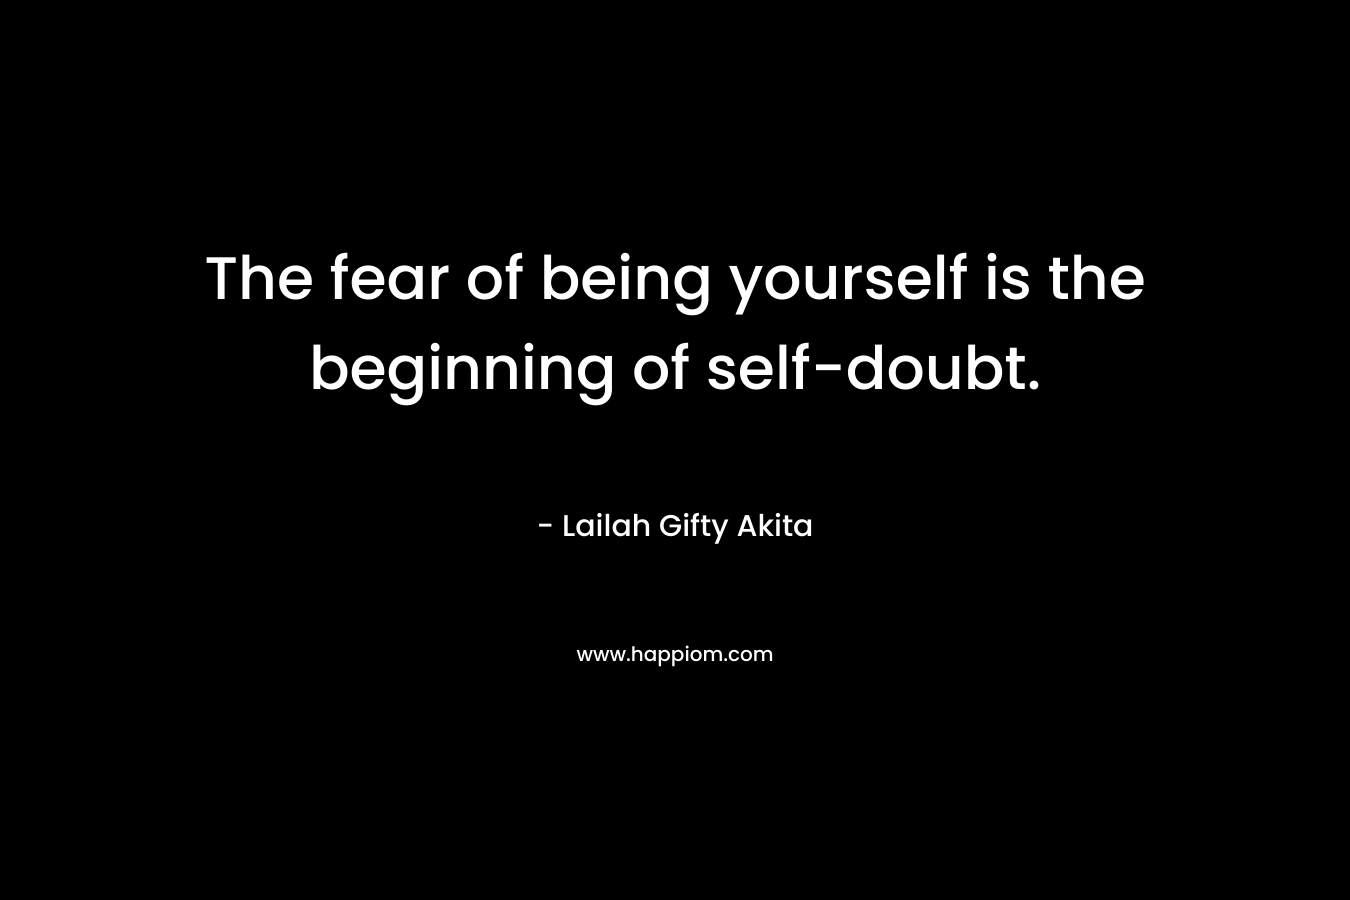 The fear of being yourself is the beginning of self-doubt.